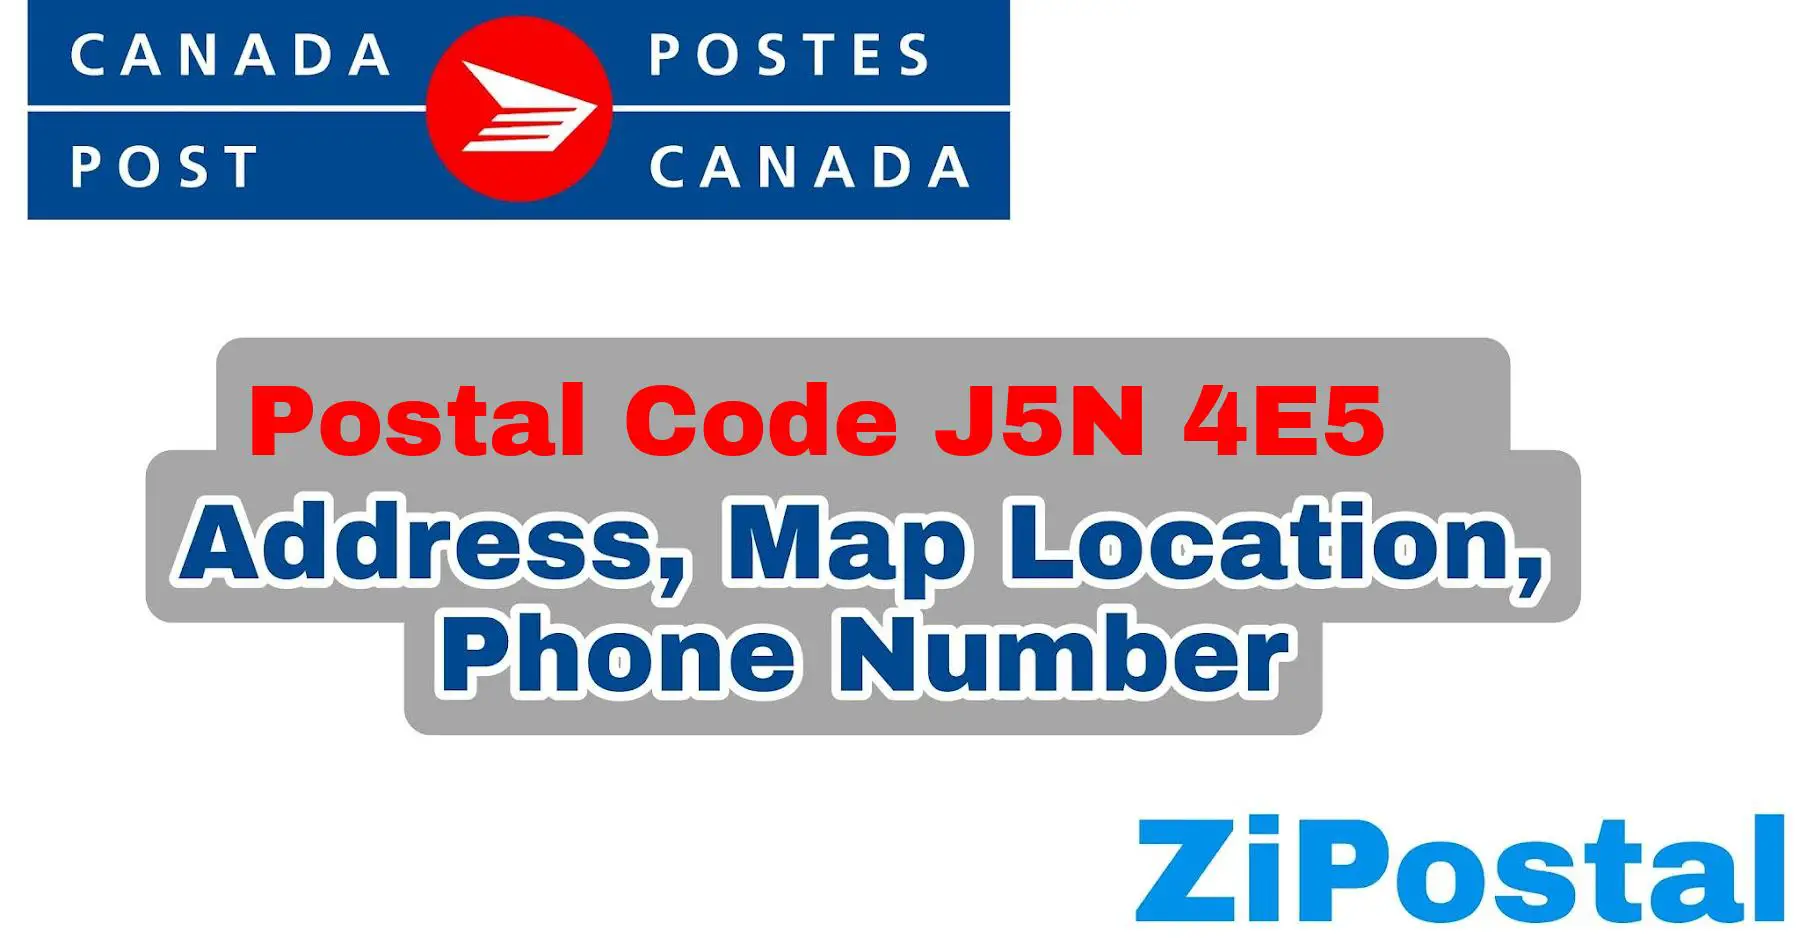 Postal Code J5N 4E5 Address Map Location and Phone Number